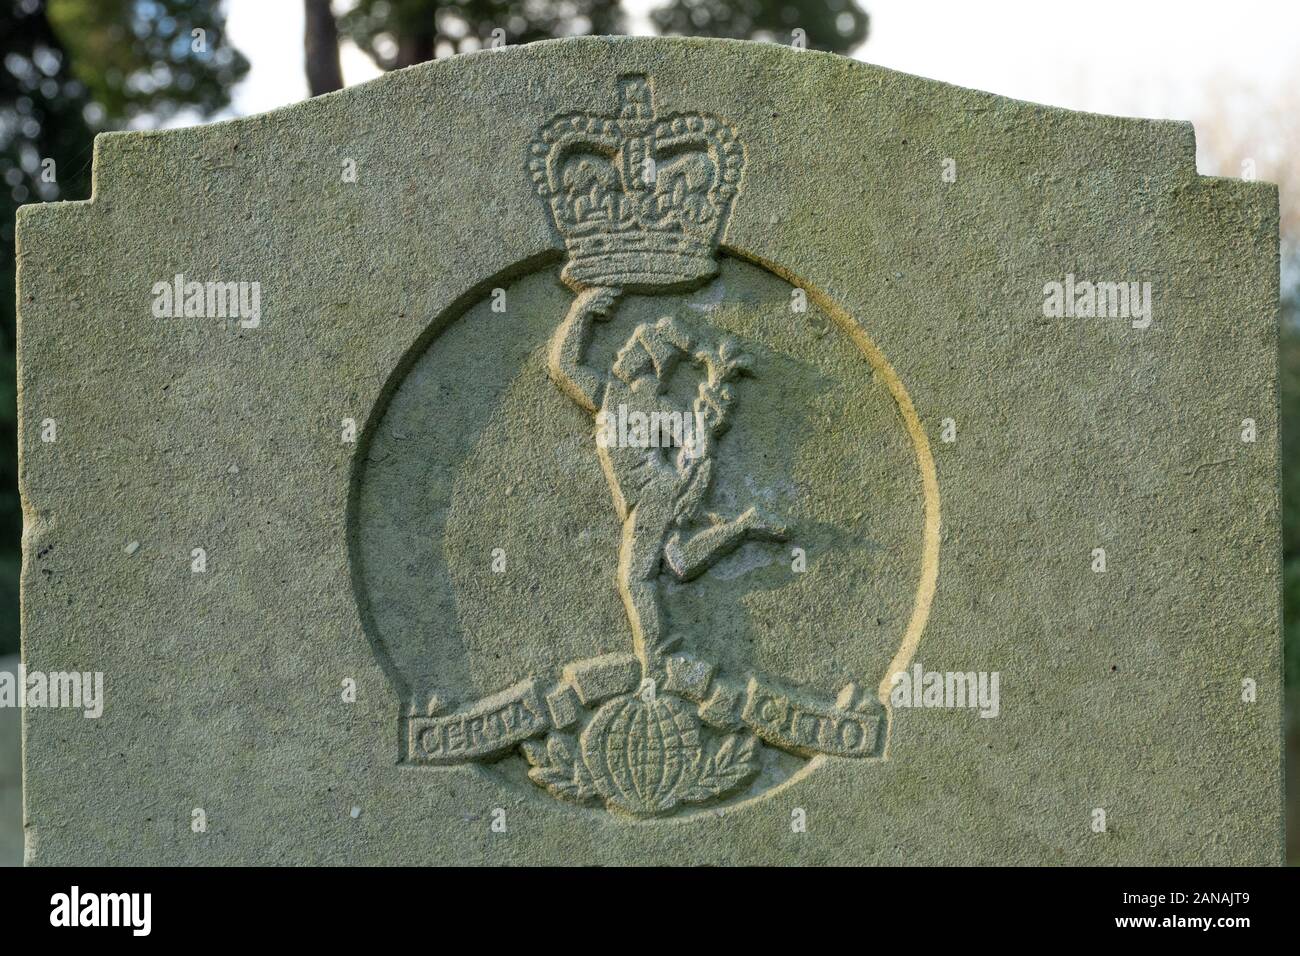 Royal Corps of Signals regimental badge emblem crest on a military gravestone or headstone, UK Stock Photo